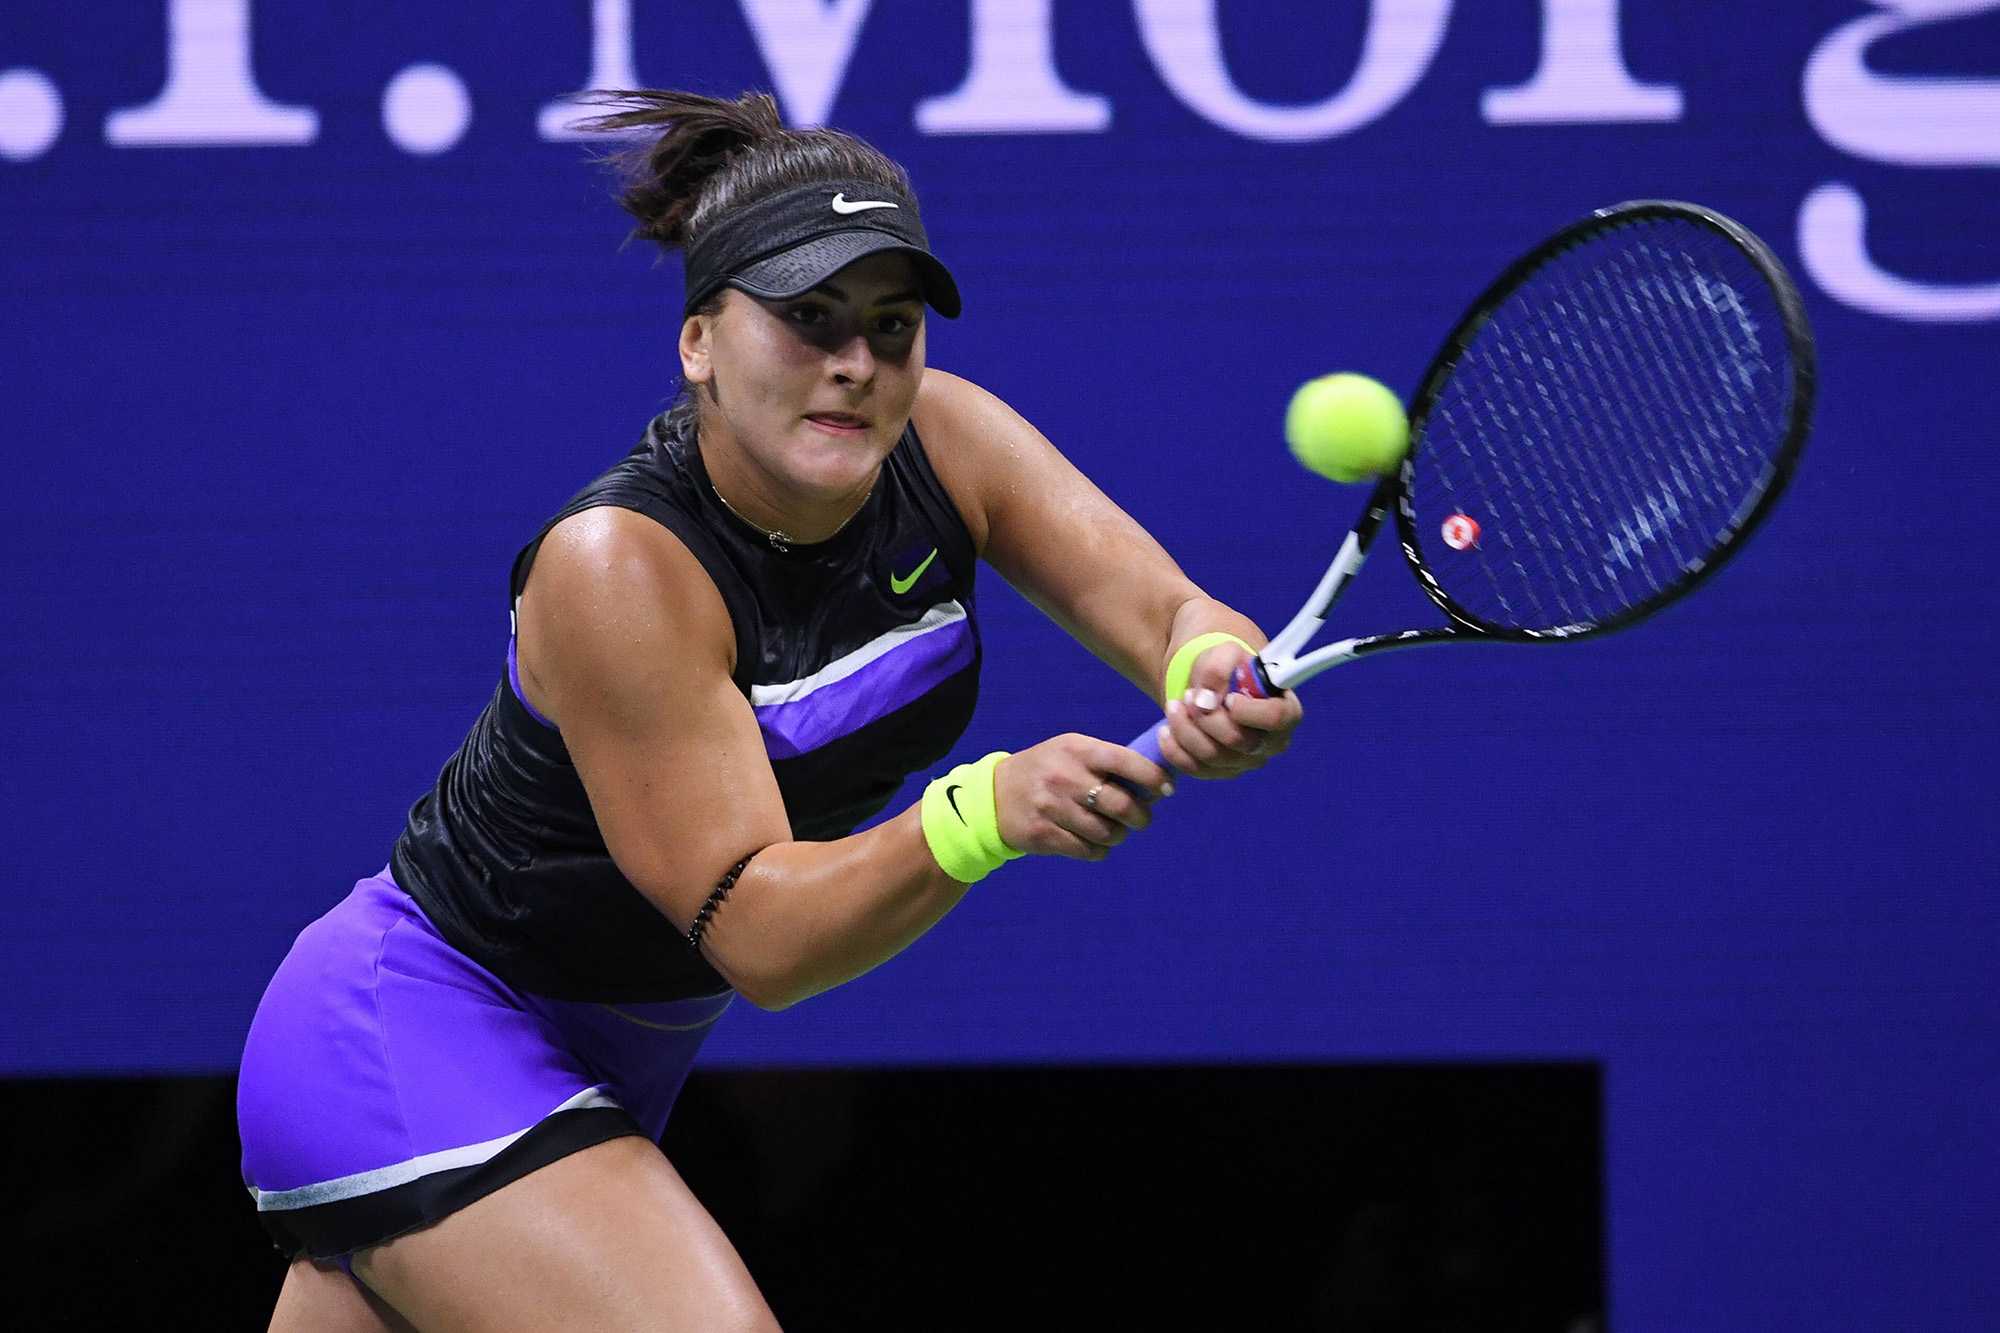 Canadas Bianca Andreescu posted a 6-3, 7-5 win in the finals of the U.S. Open against Serena Williams of the United States at Arthur Ashe Stadium at the USTA Billie Jean King National Tennis Center in New York on Saturday, Sept. 7, 2019. (Imago/Zuma Press/TNS)